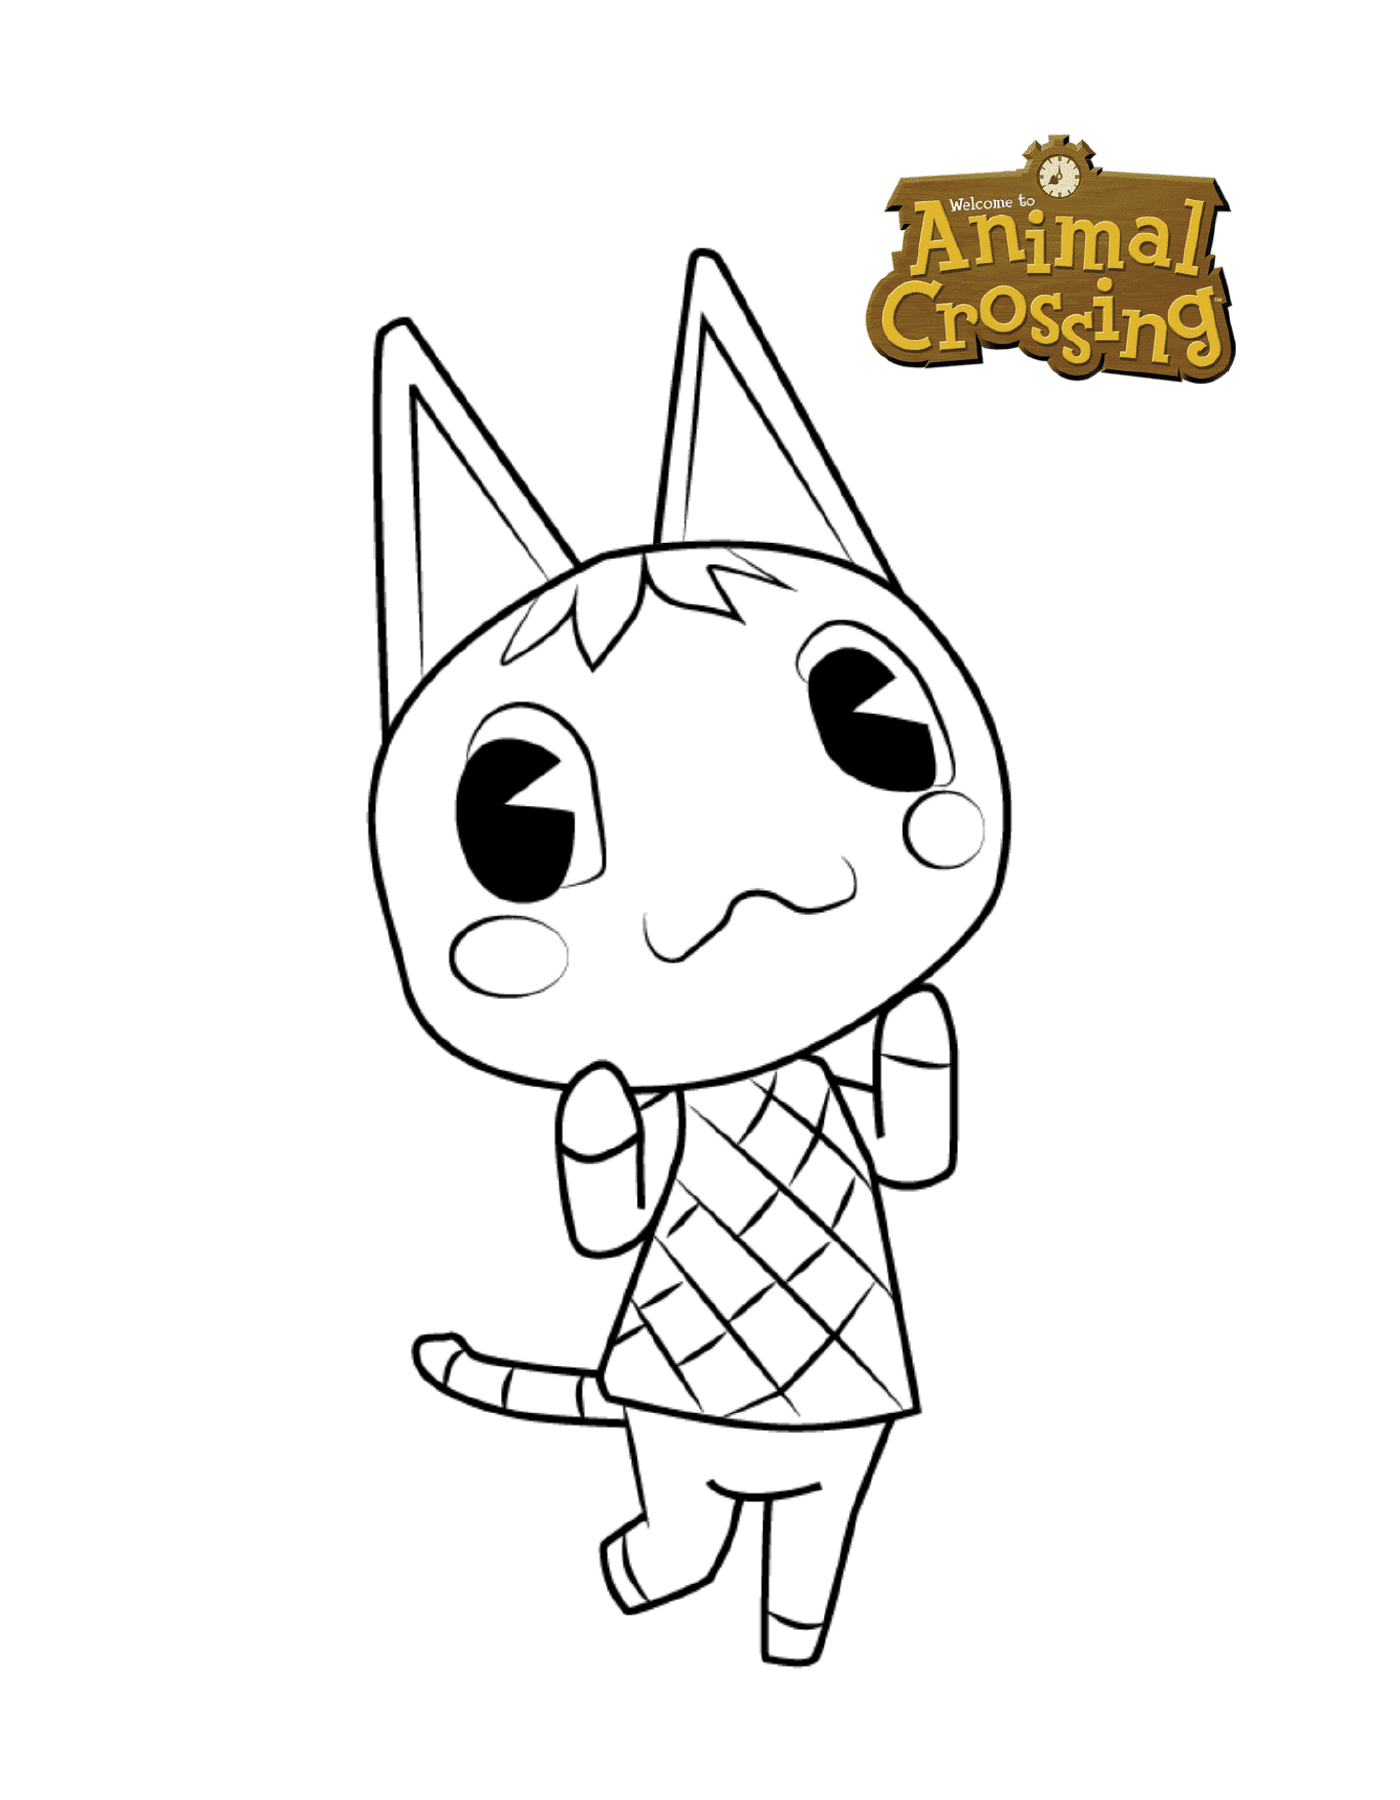   Purrl d'Animal Crossing, chat dessiné 